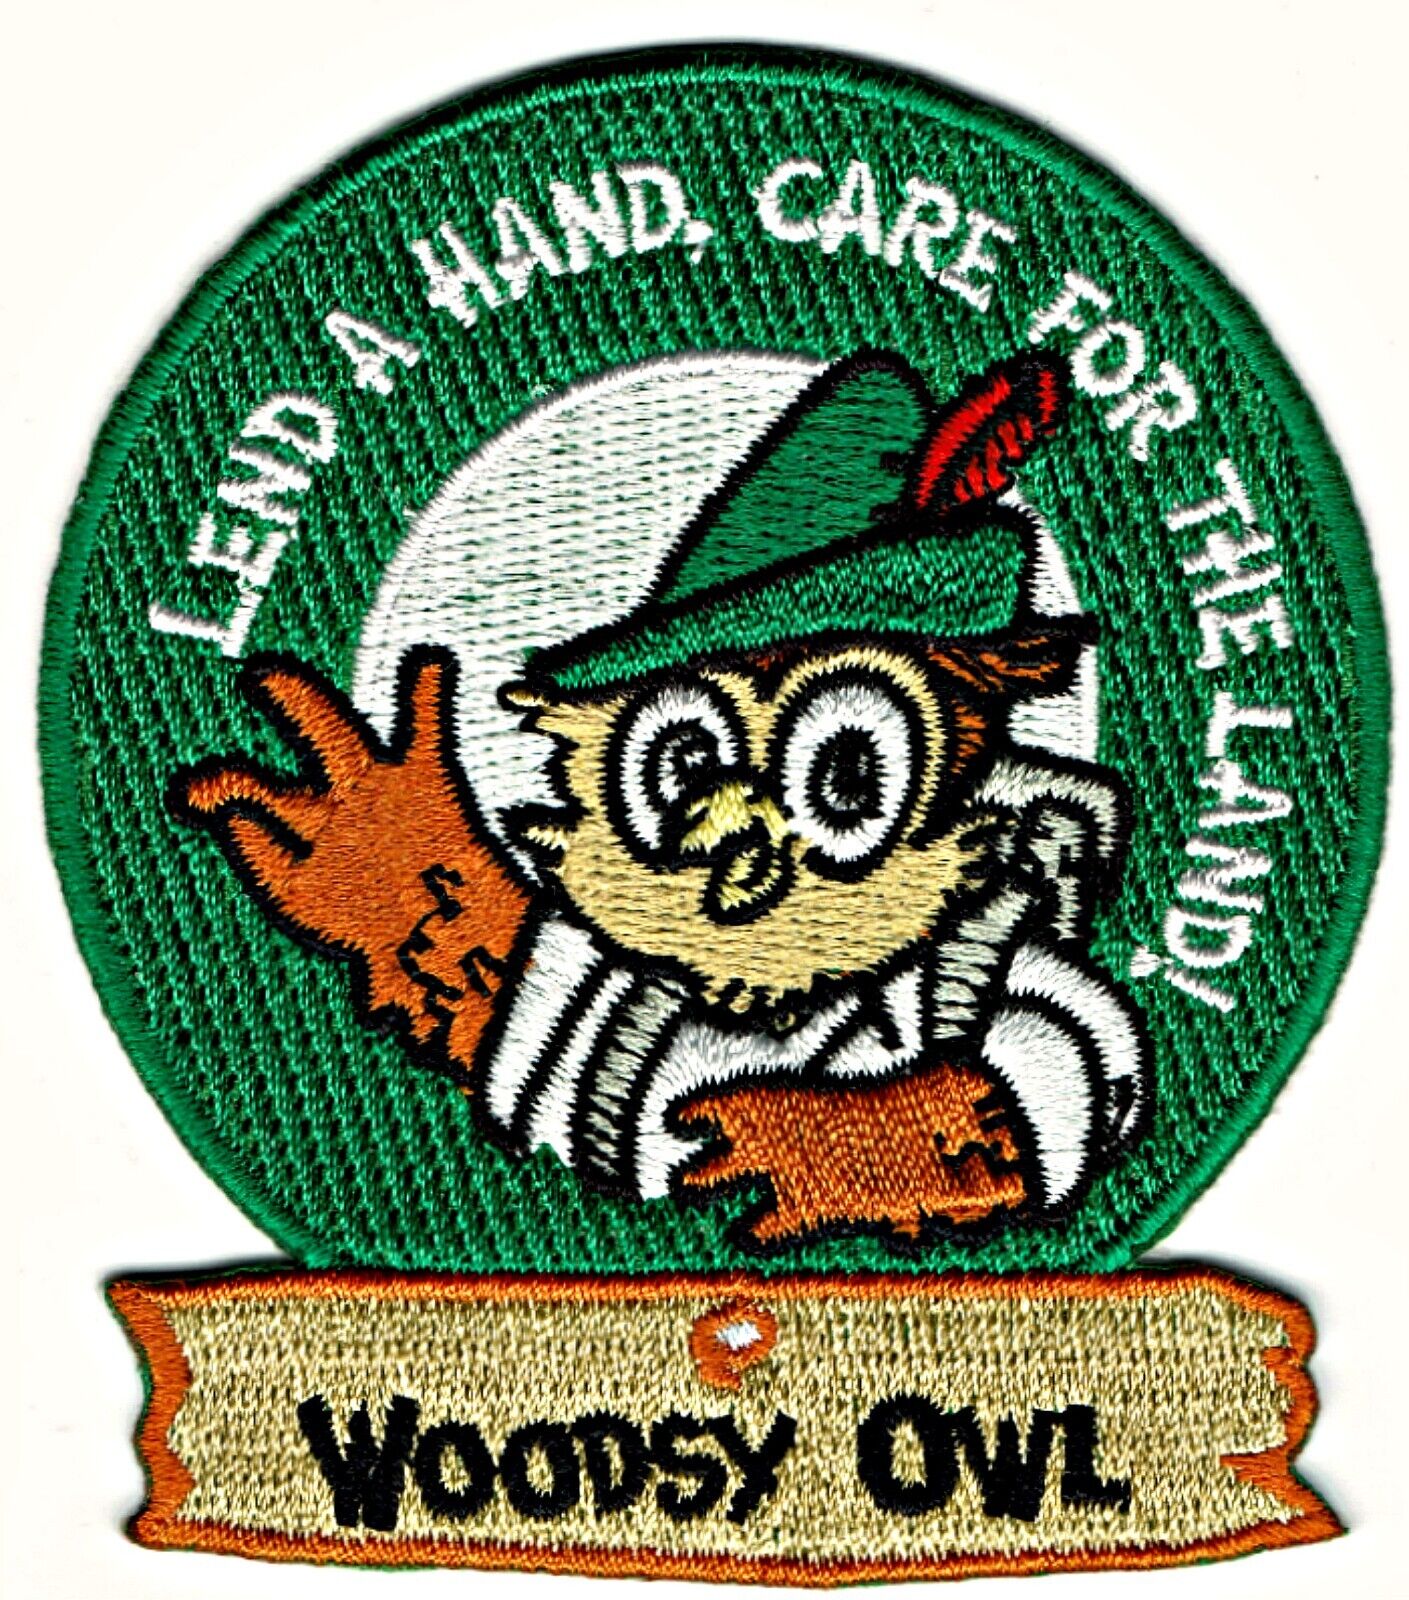 Official Woodsy OWL “Lend Hand, Care for Land” Patch - Smokey Bear Friend - New